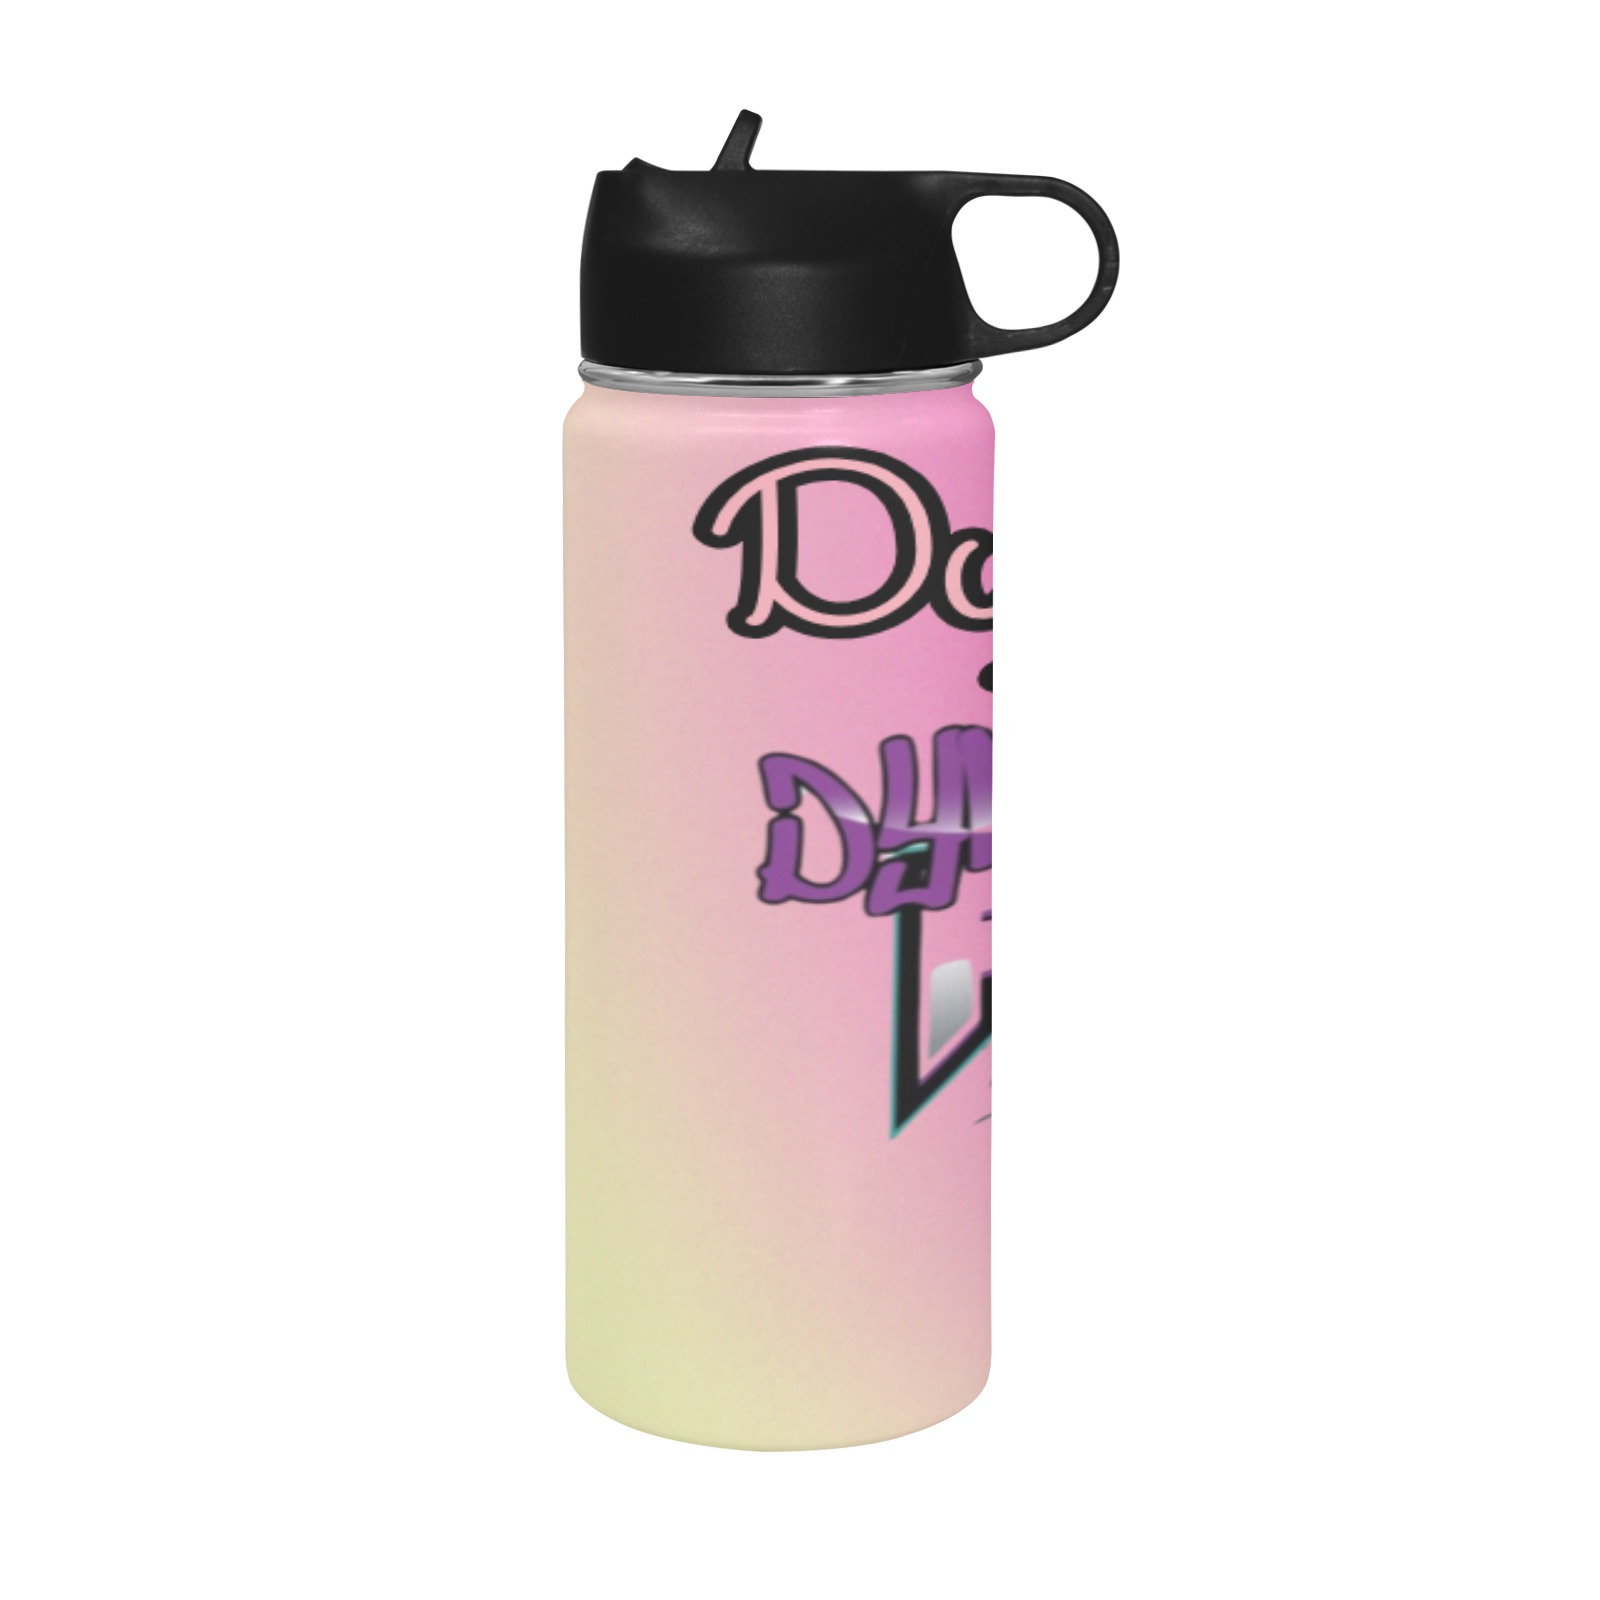 dfdc cup dyllin Insulated Water Bottle with Straw Lid (18 oz)